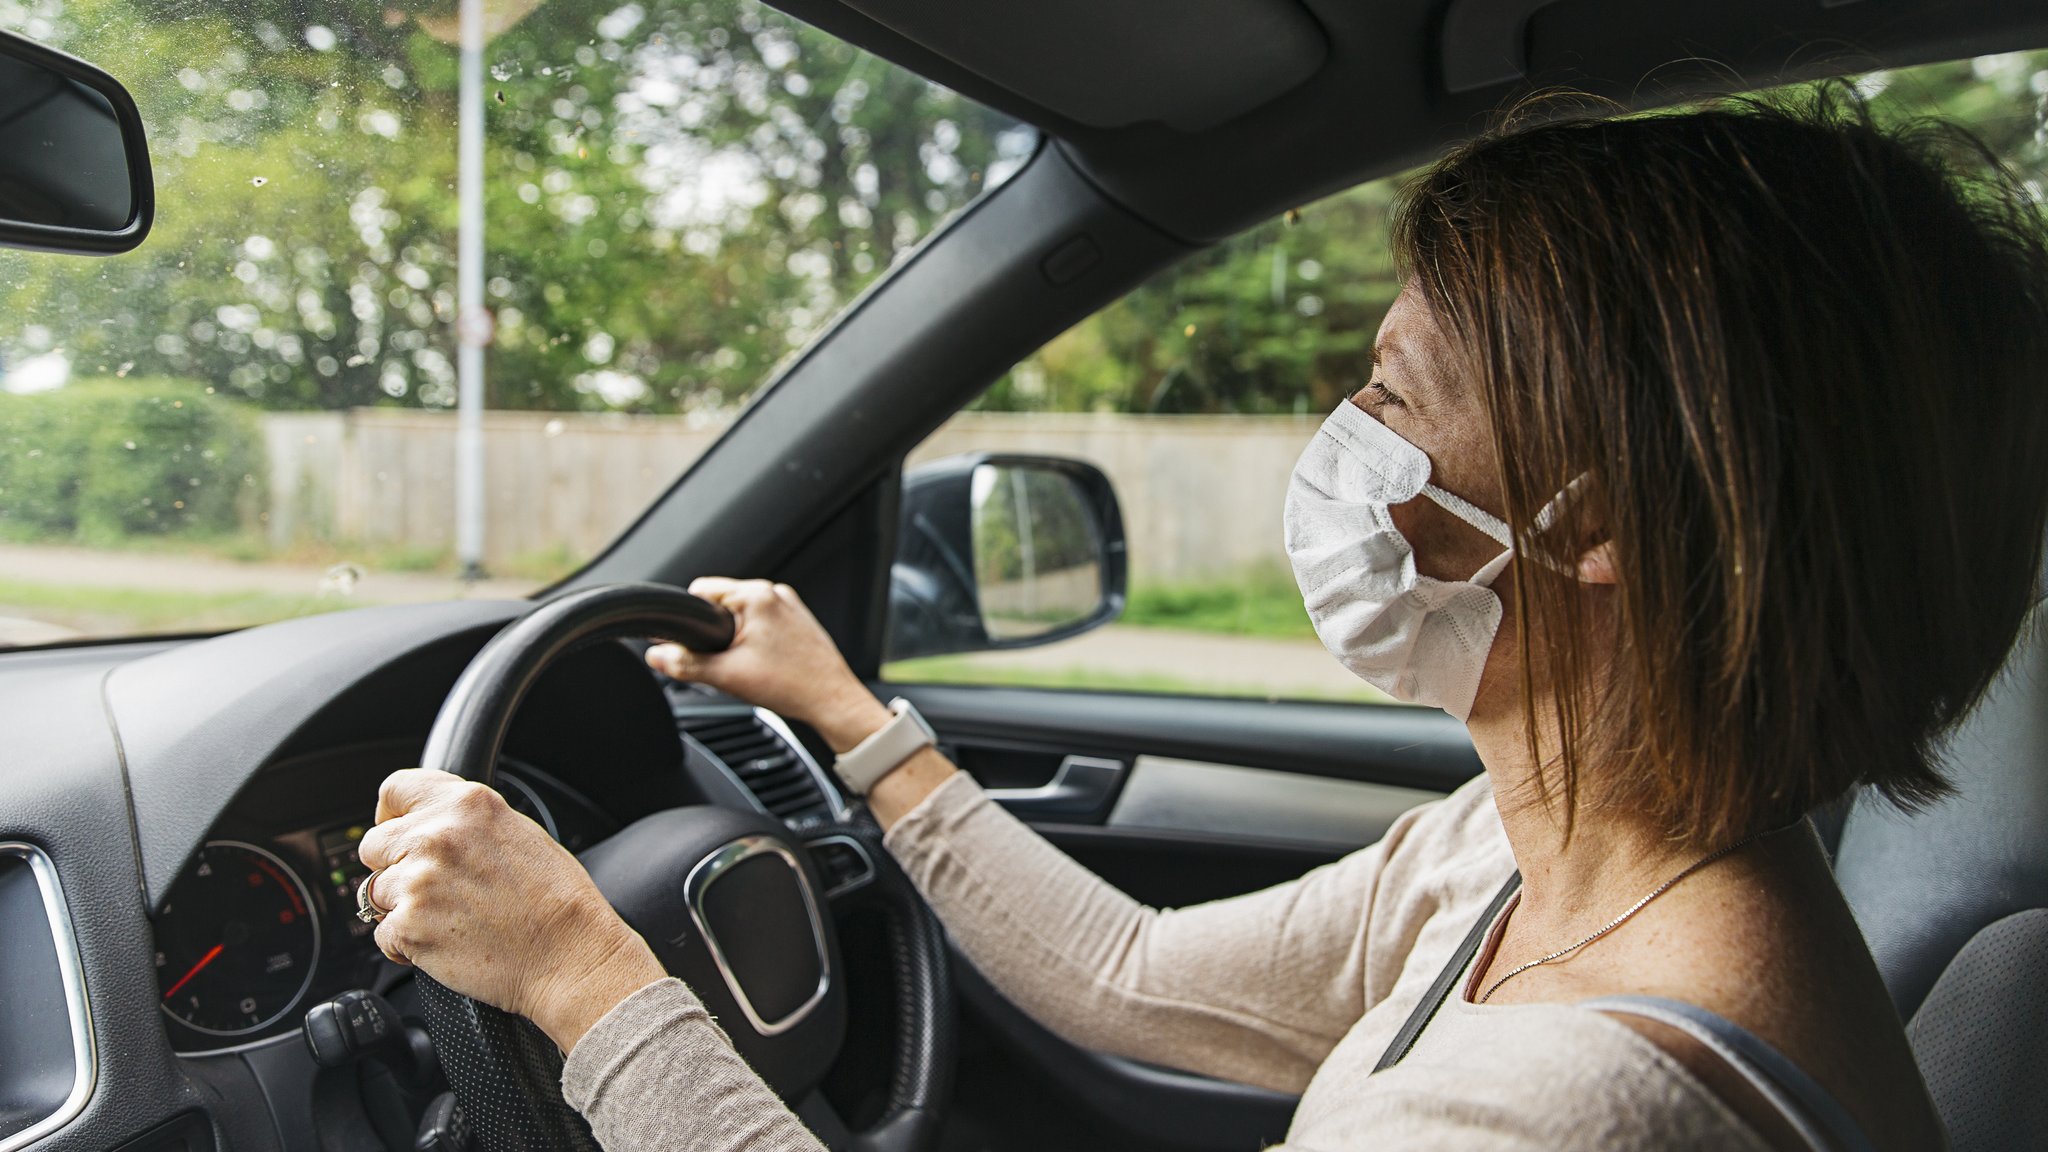 Covid study: How to avoid catching virus in a shared car